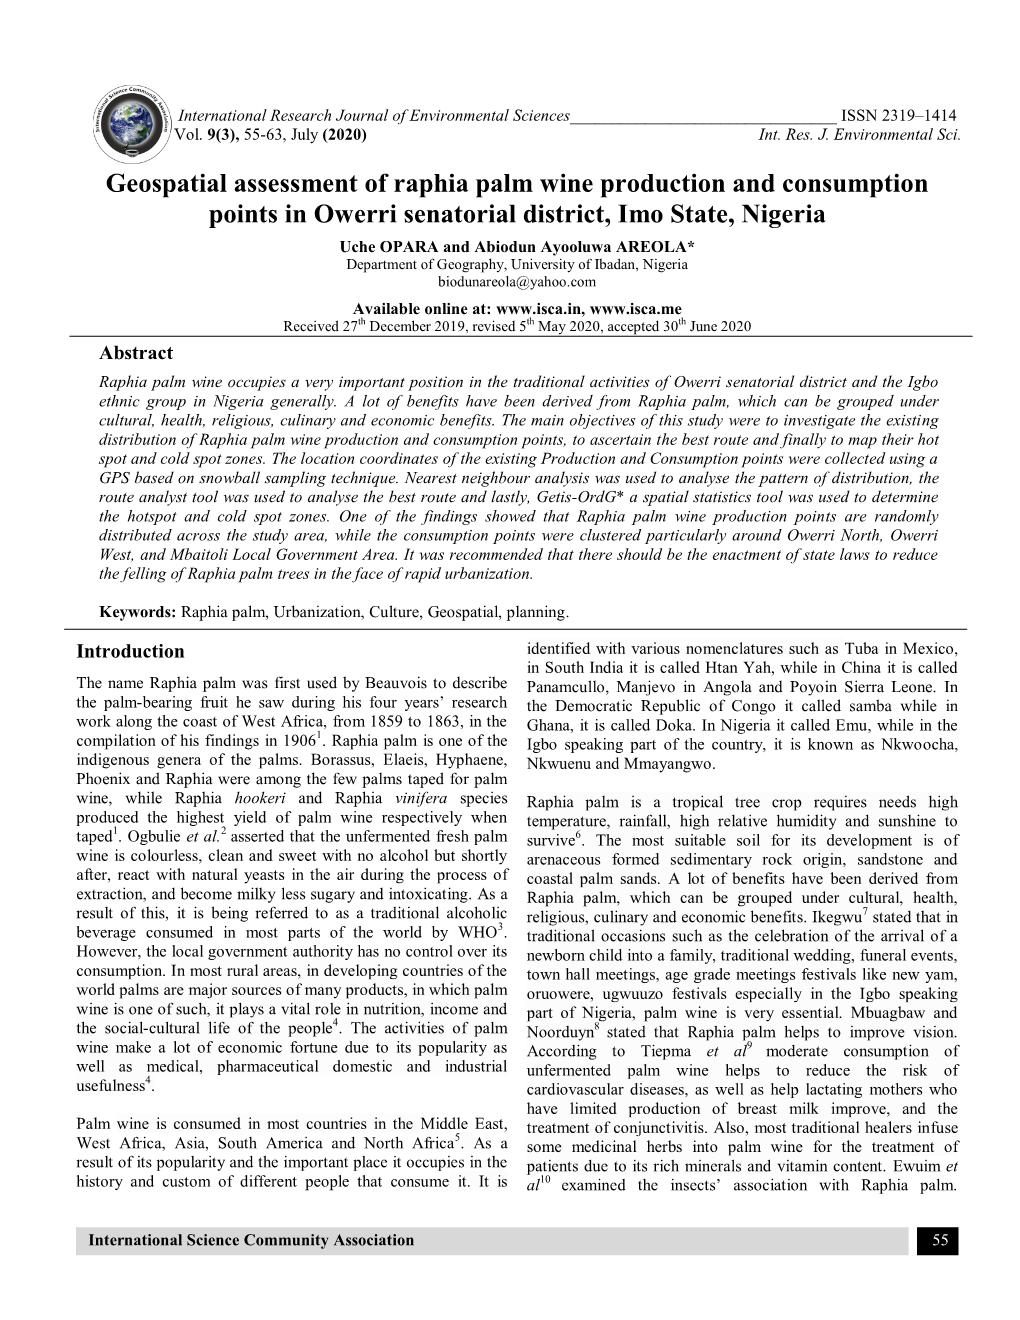 Geospatial Assessment of Raphia Palm Wine Production and Consumption